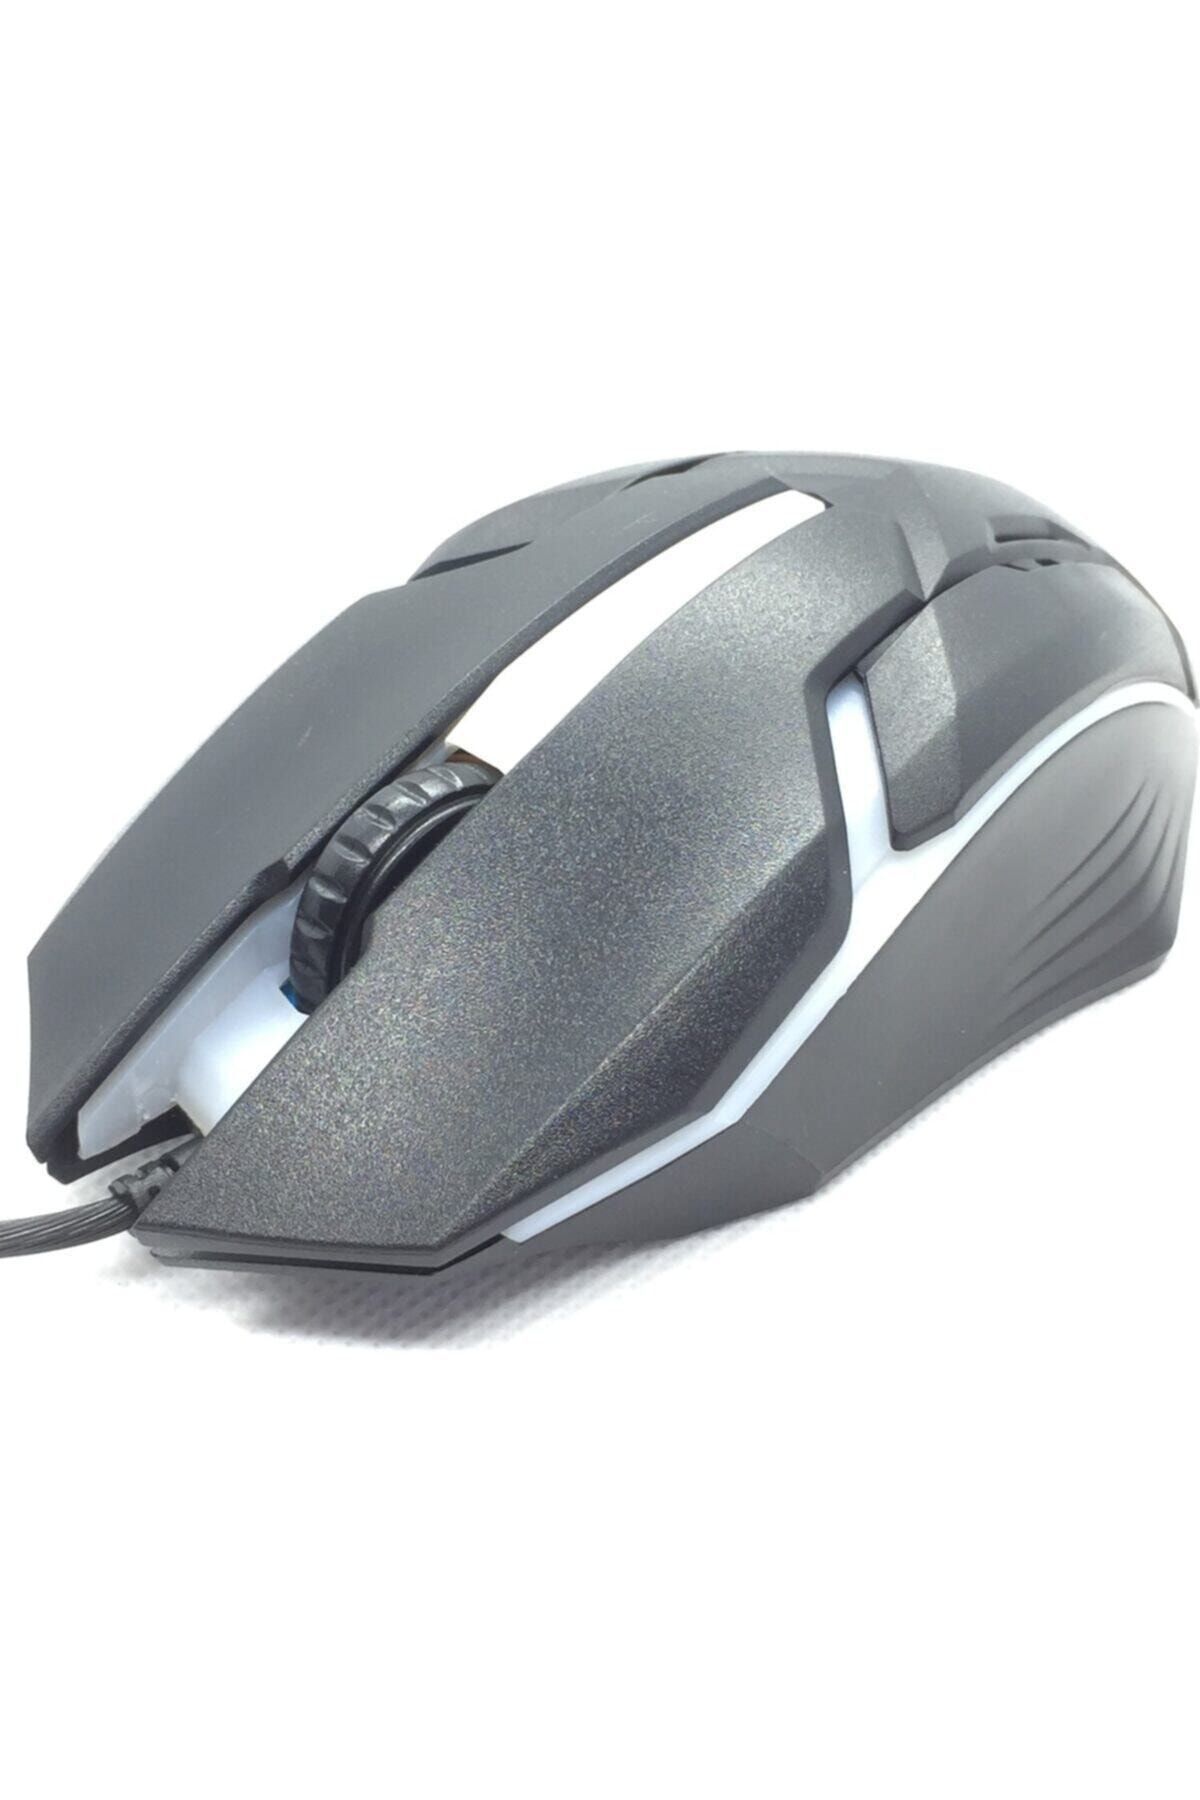 Platoon Pl-1619 Gaming Mouse ( )